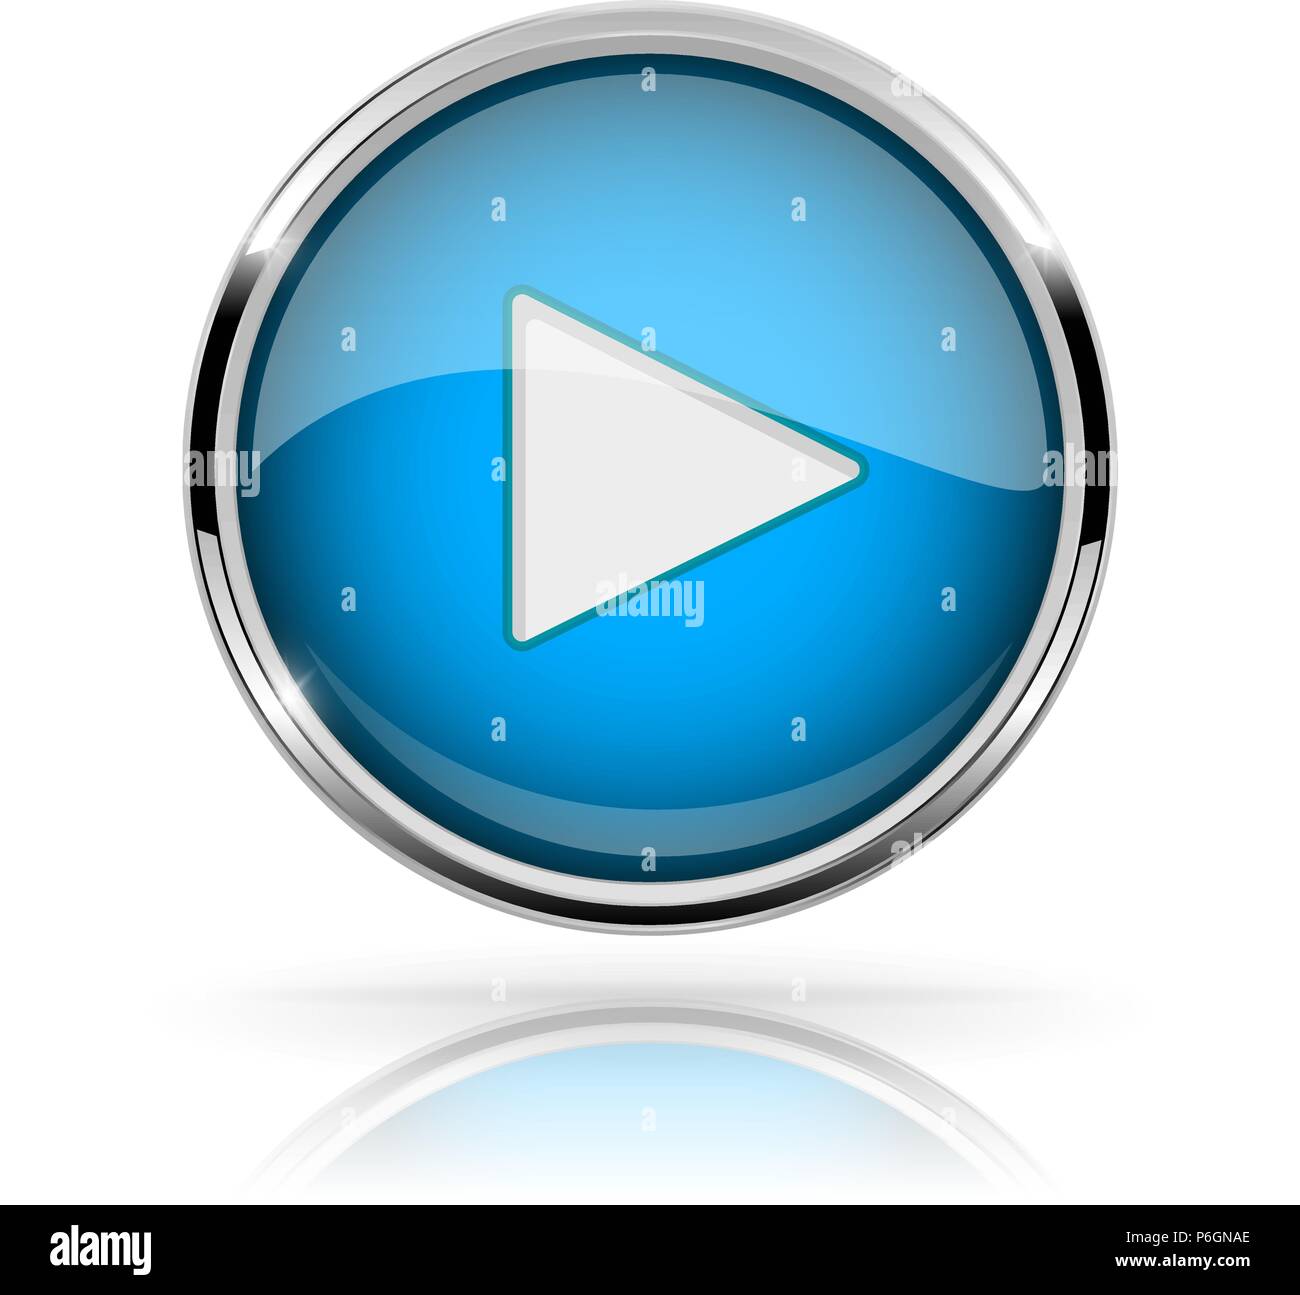 Blue round media button. PLAY button. Shiny icon with chrome frame and with reflection Stock Vector